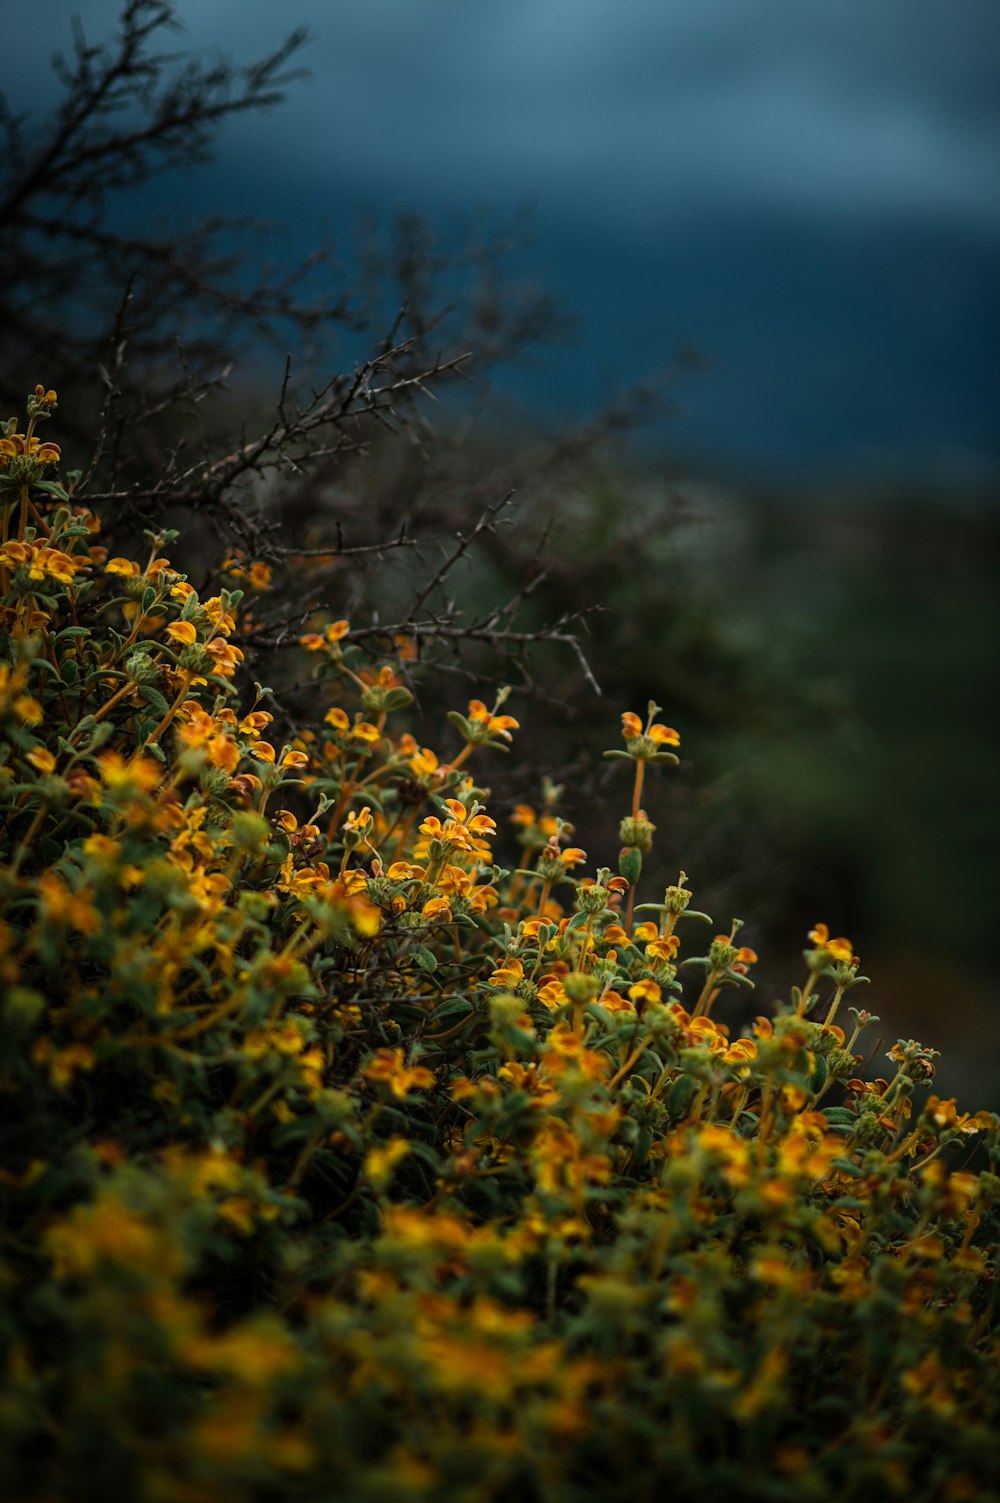 a bush with yellow flowers in the foreground and a dark sky in the background